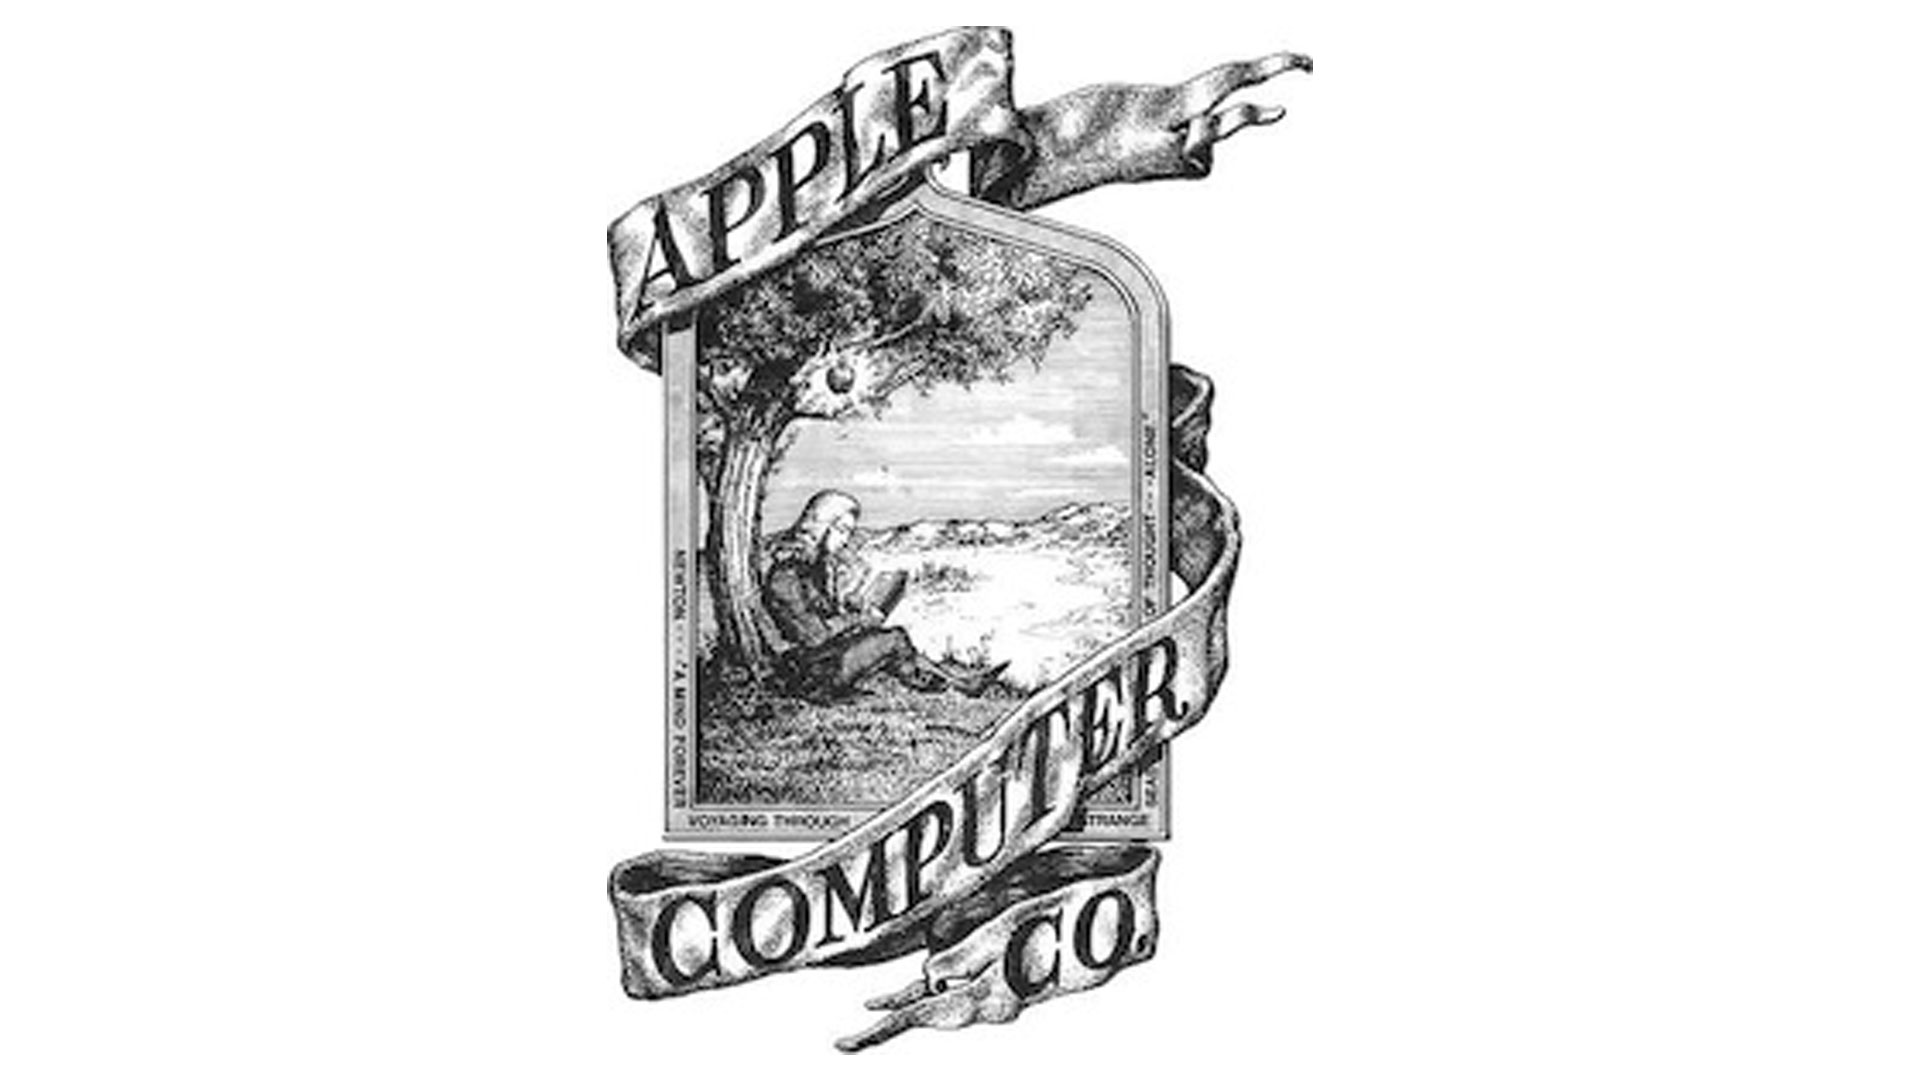 The story behind Apple's first logo